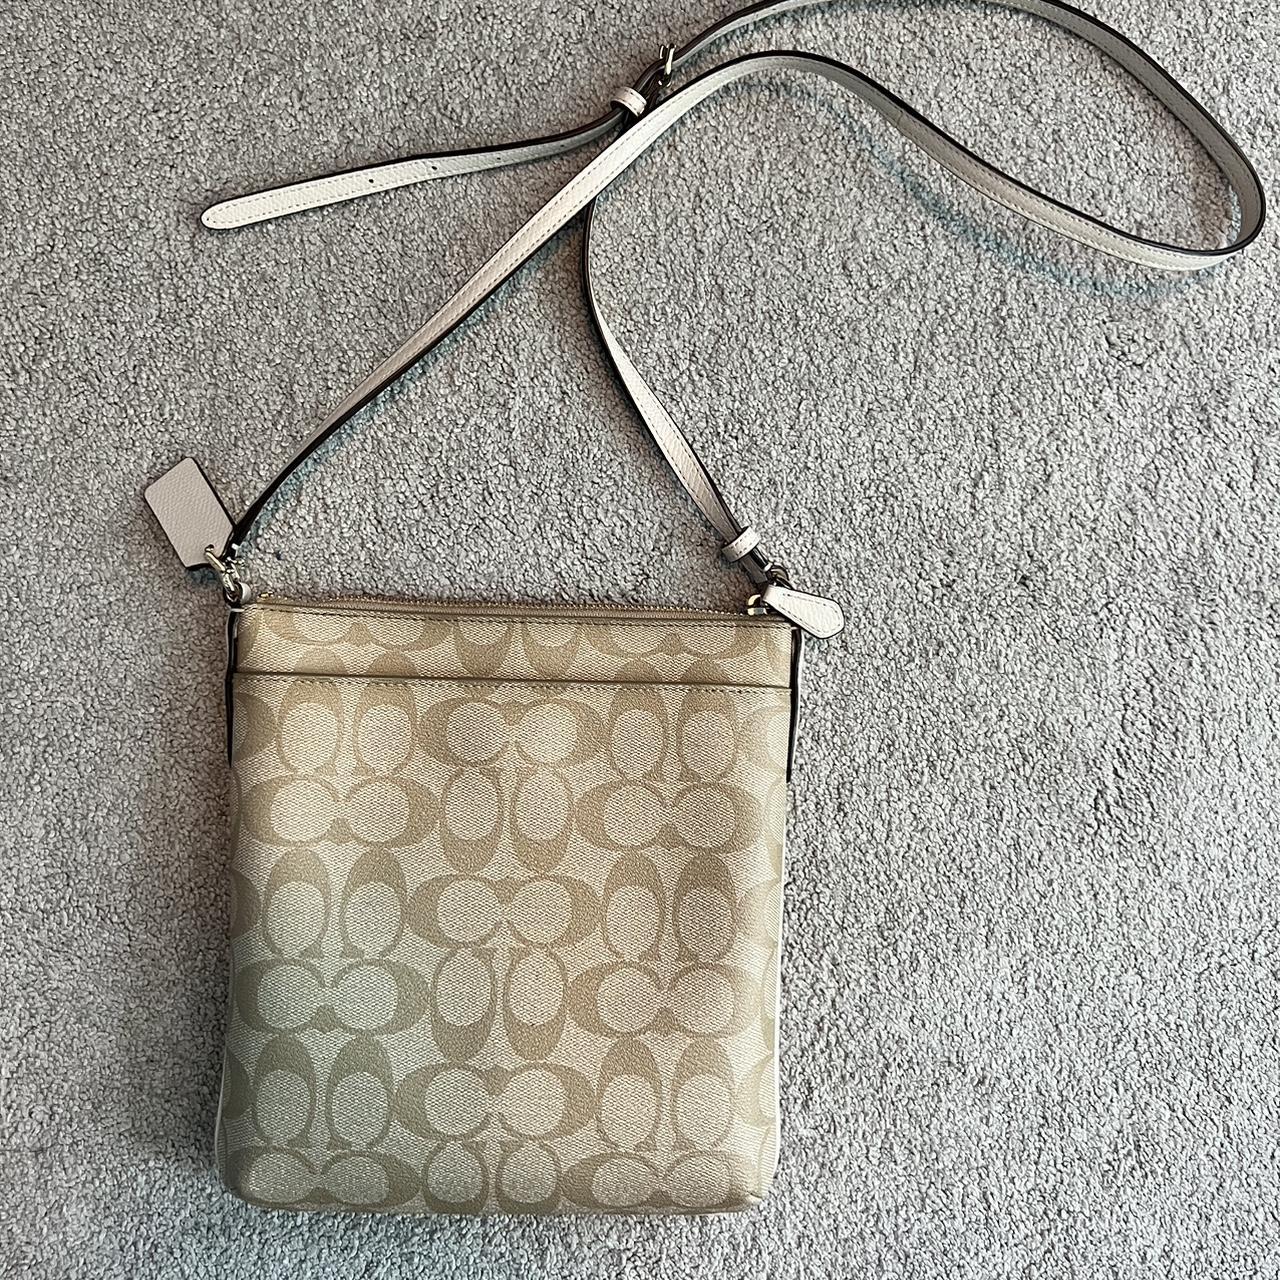 Coach Jes crossbody Used bag in great condition - Depop